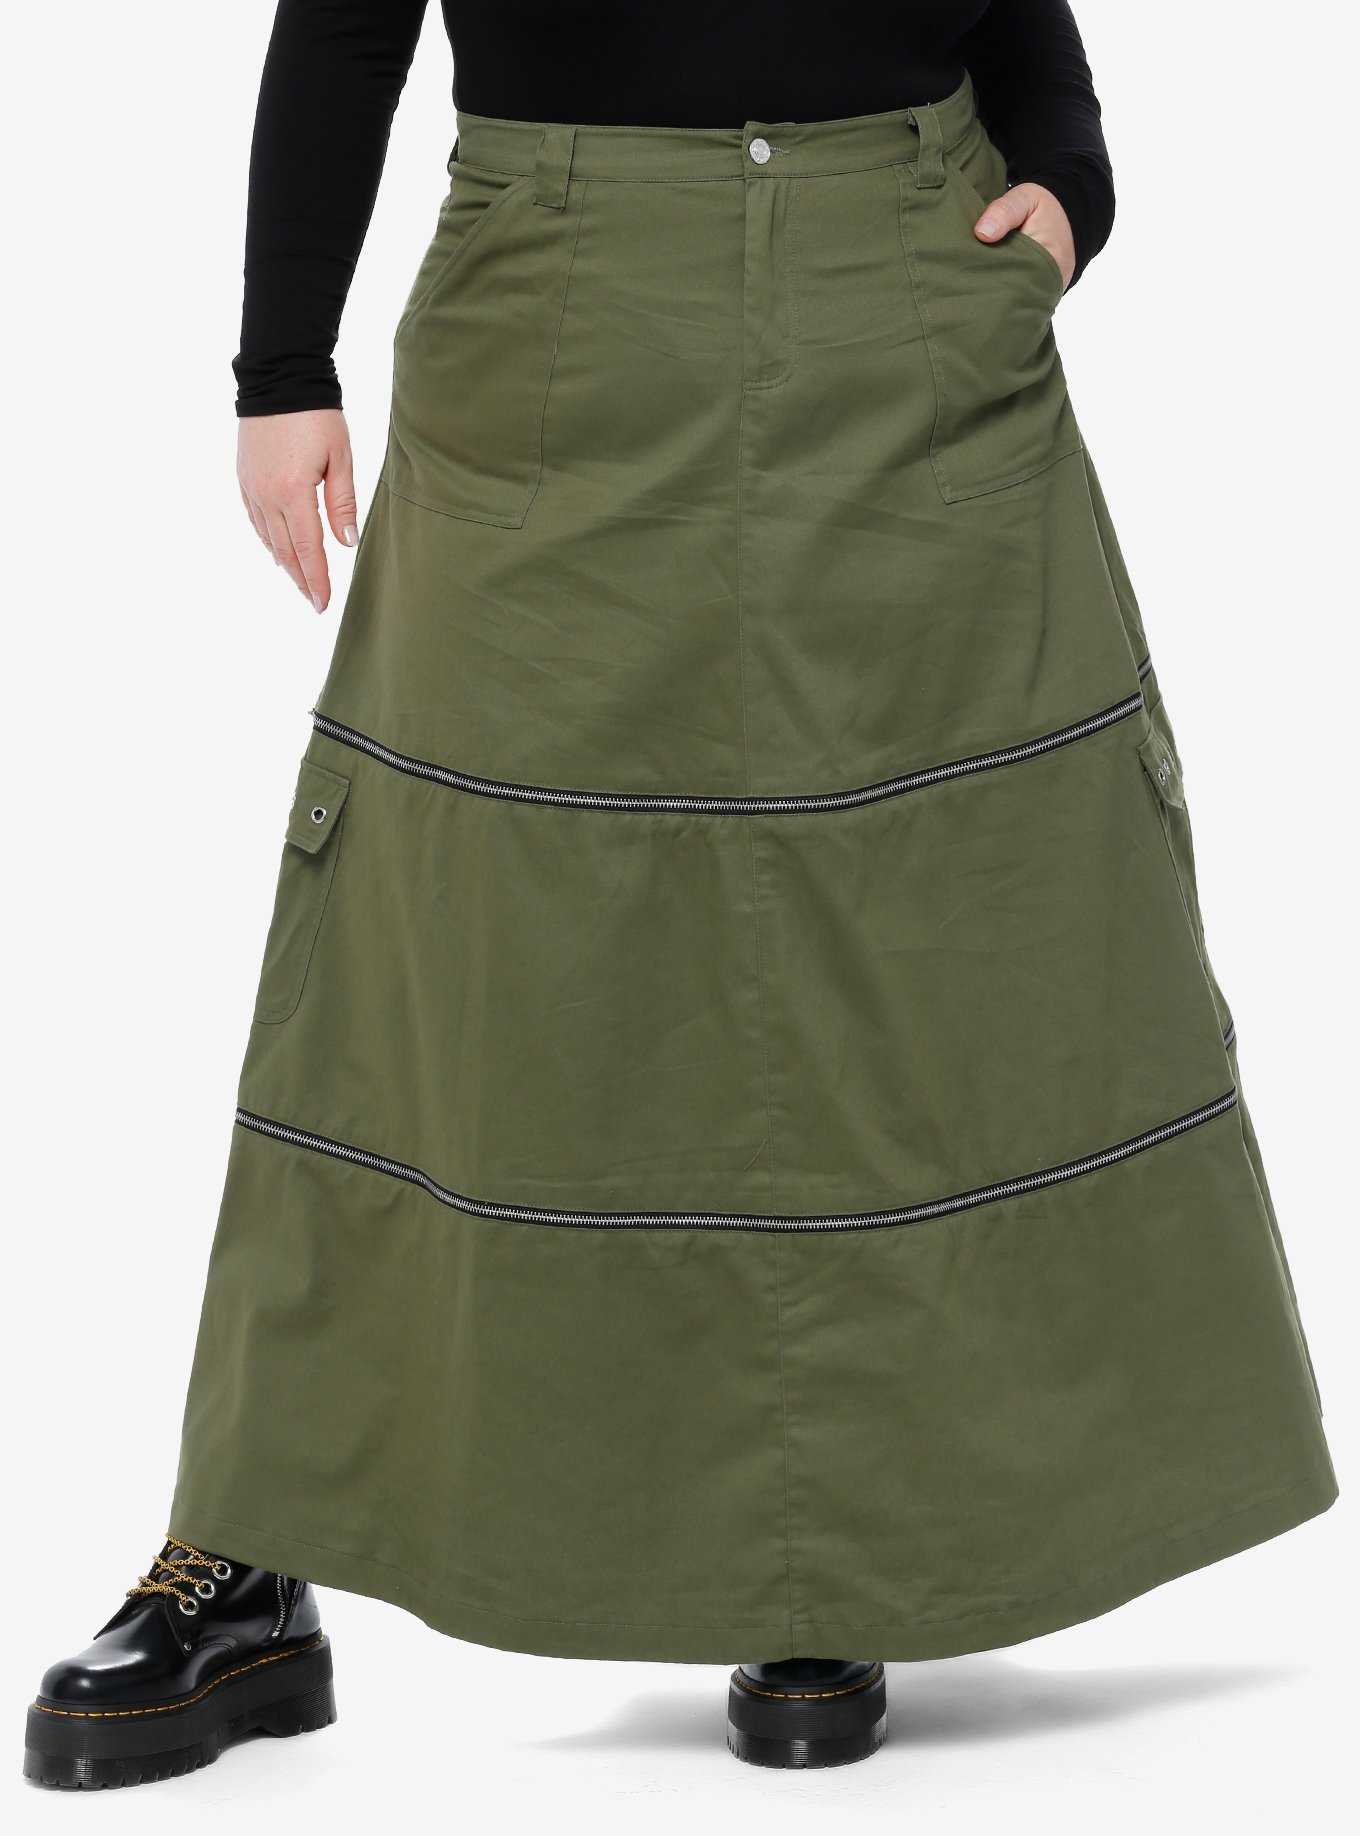 Women's Plus Size Maxi Skirt, Fold Over Skirt With High Waist, Long Skirt  in Blue, Plus Size Clothes for Women -  Canada